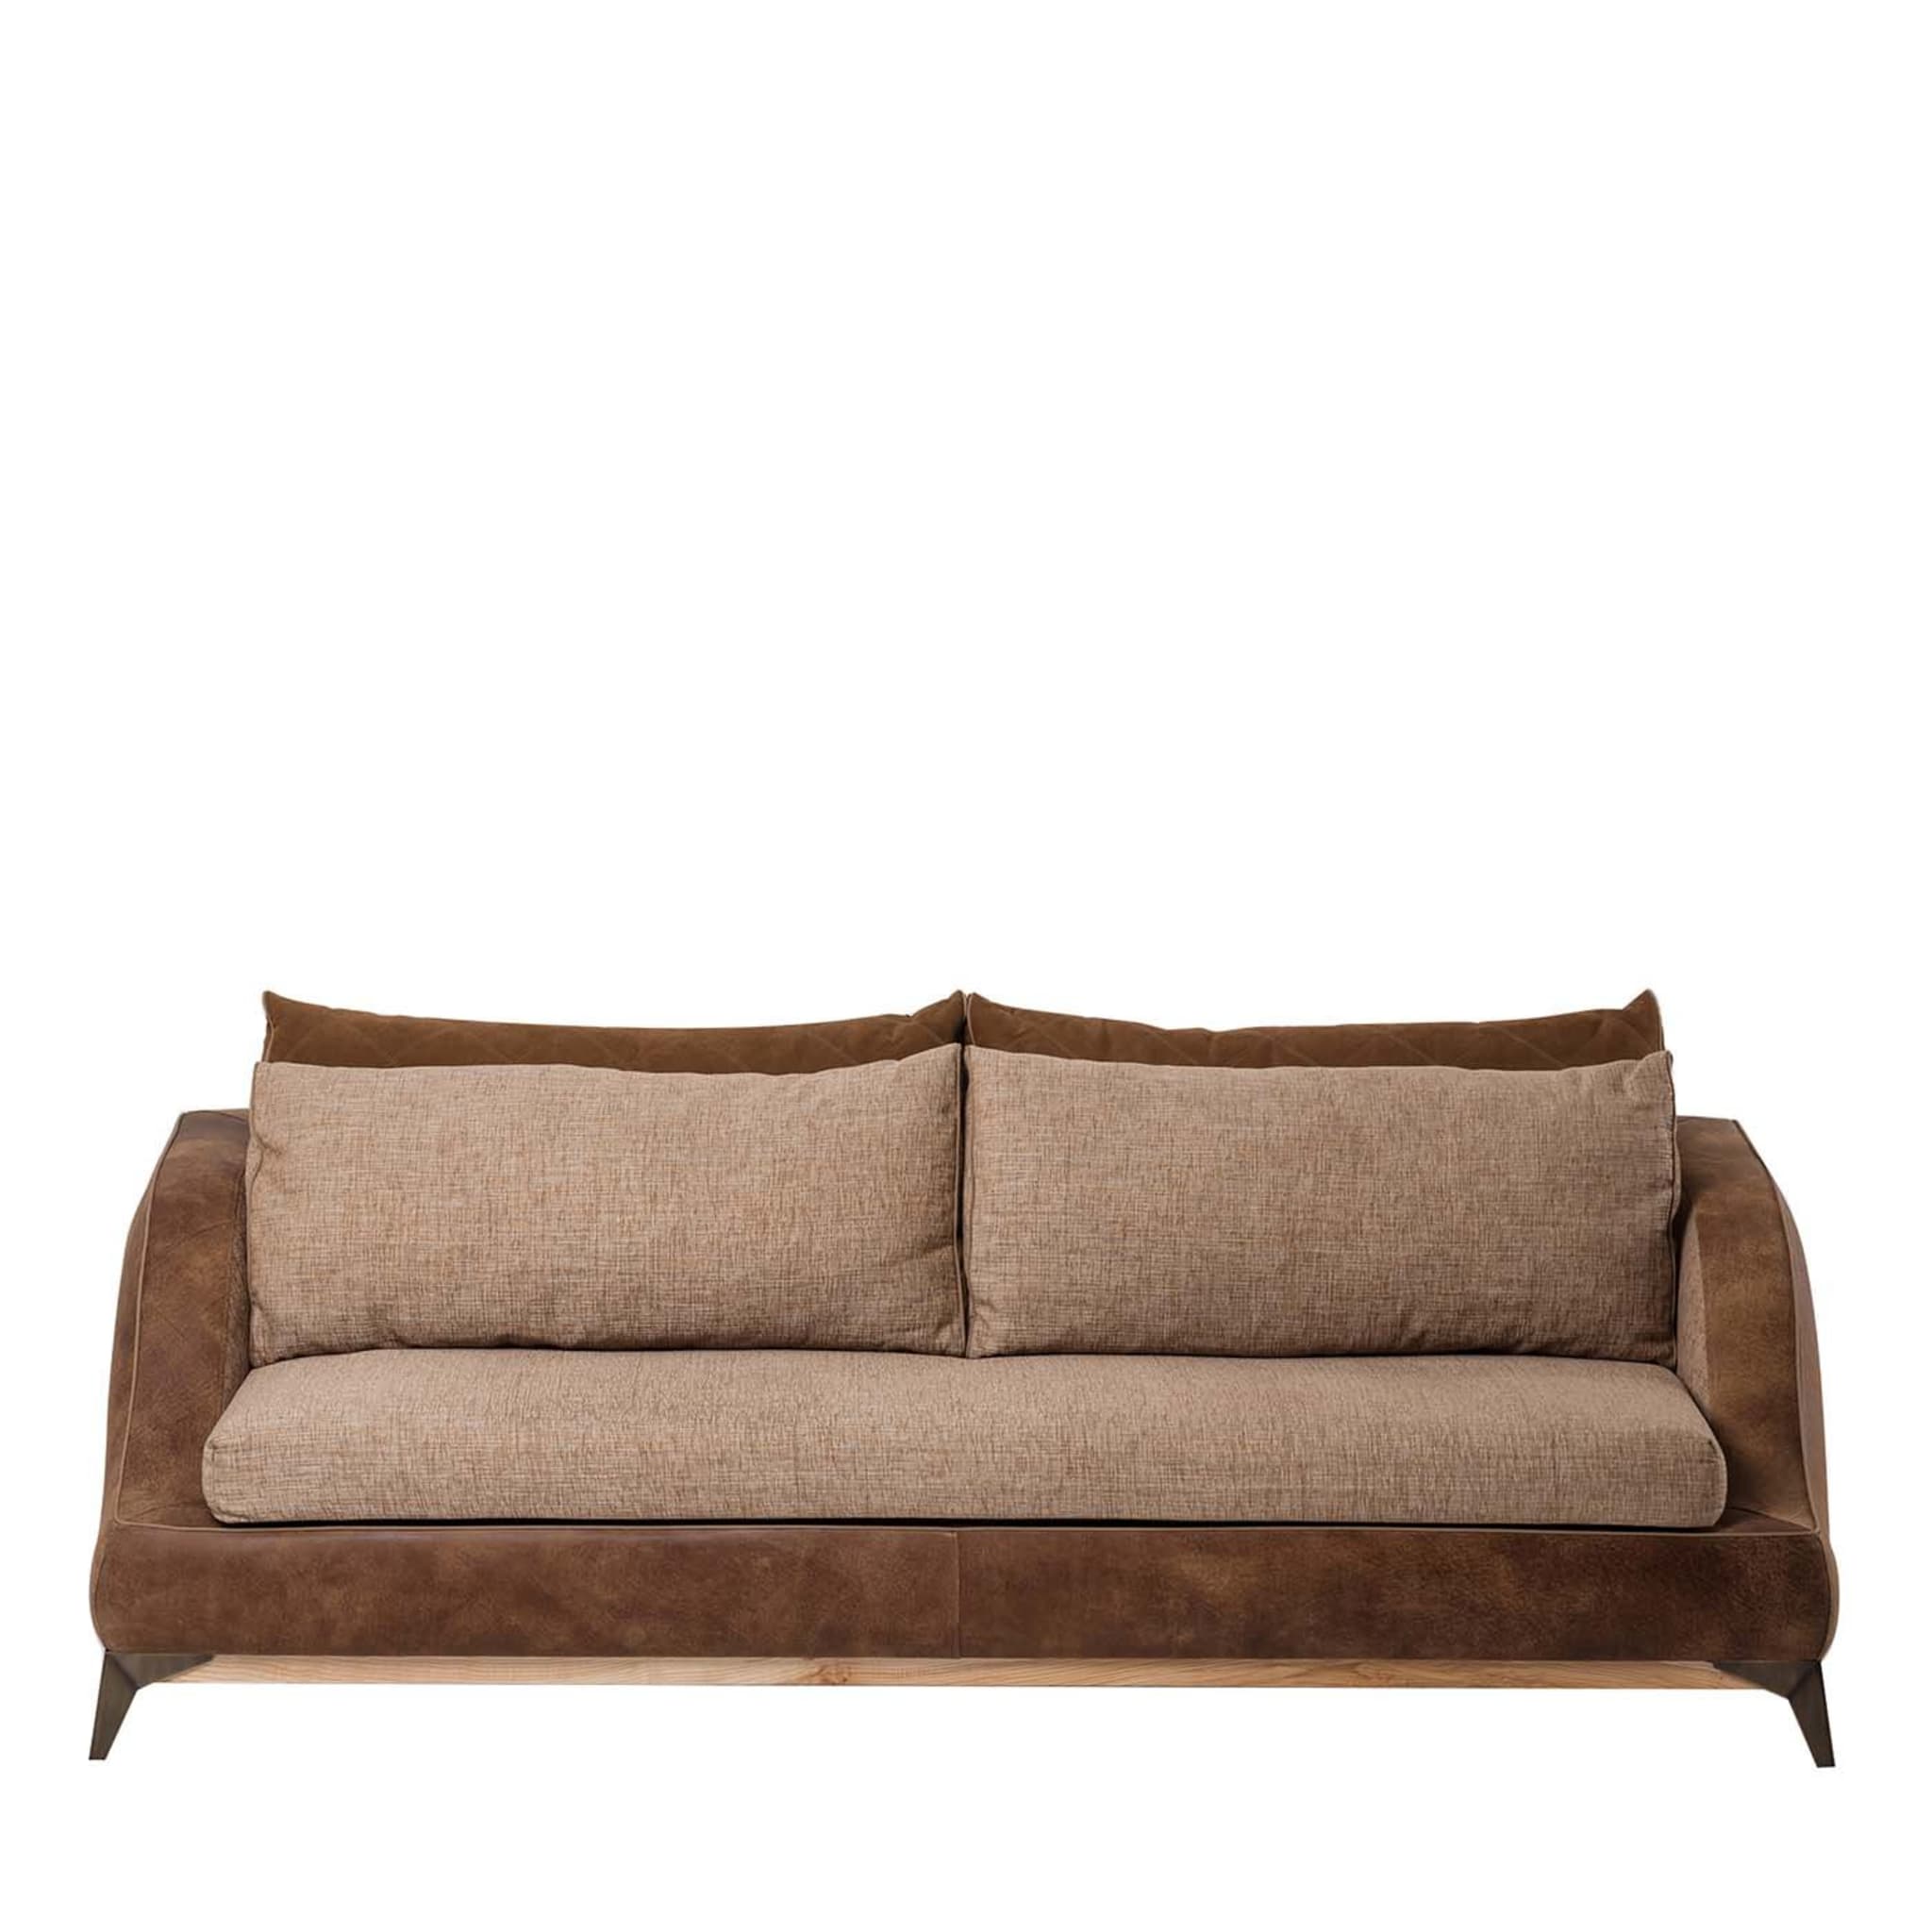 3-Seater Sofa in Leather & Fabric Combination - Main view